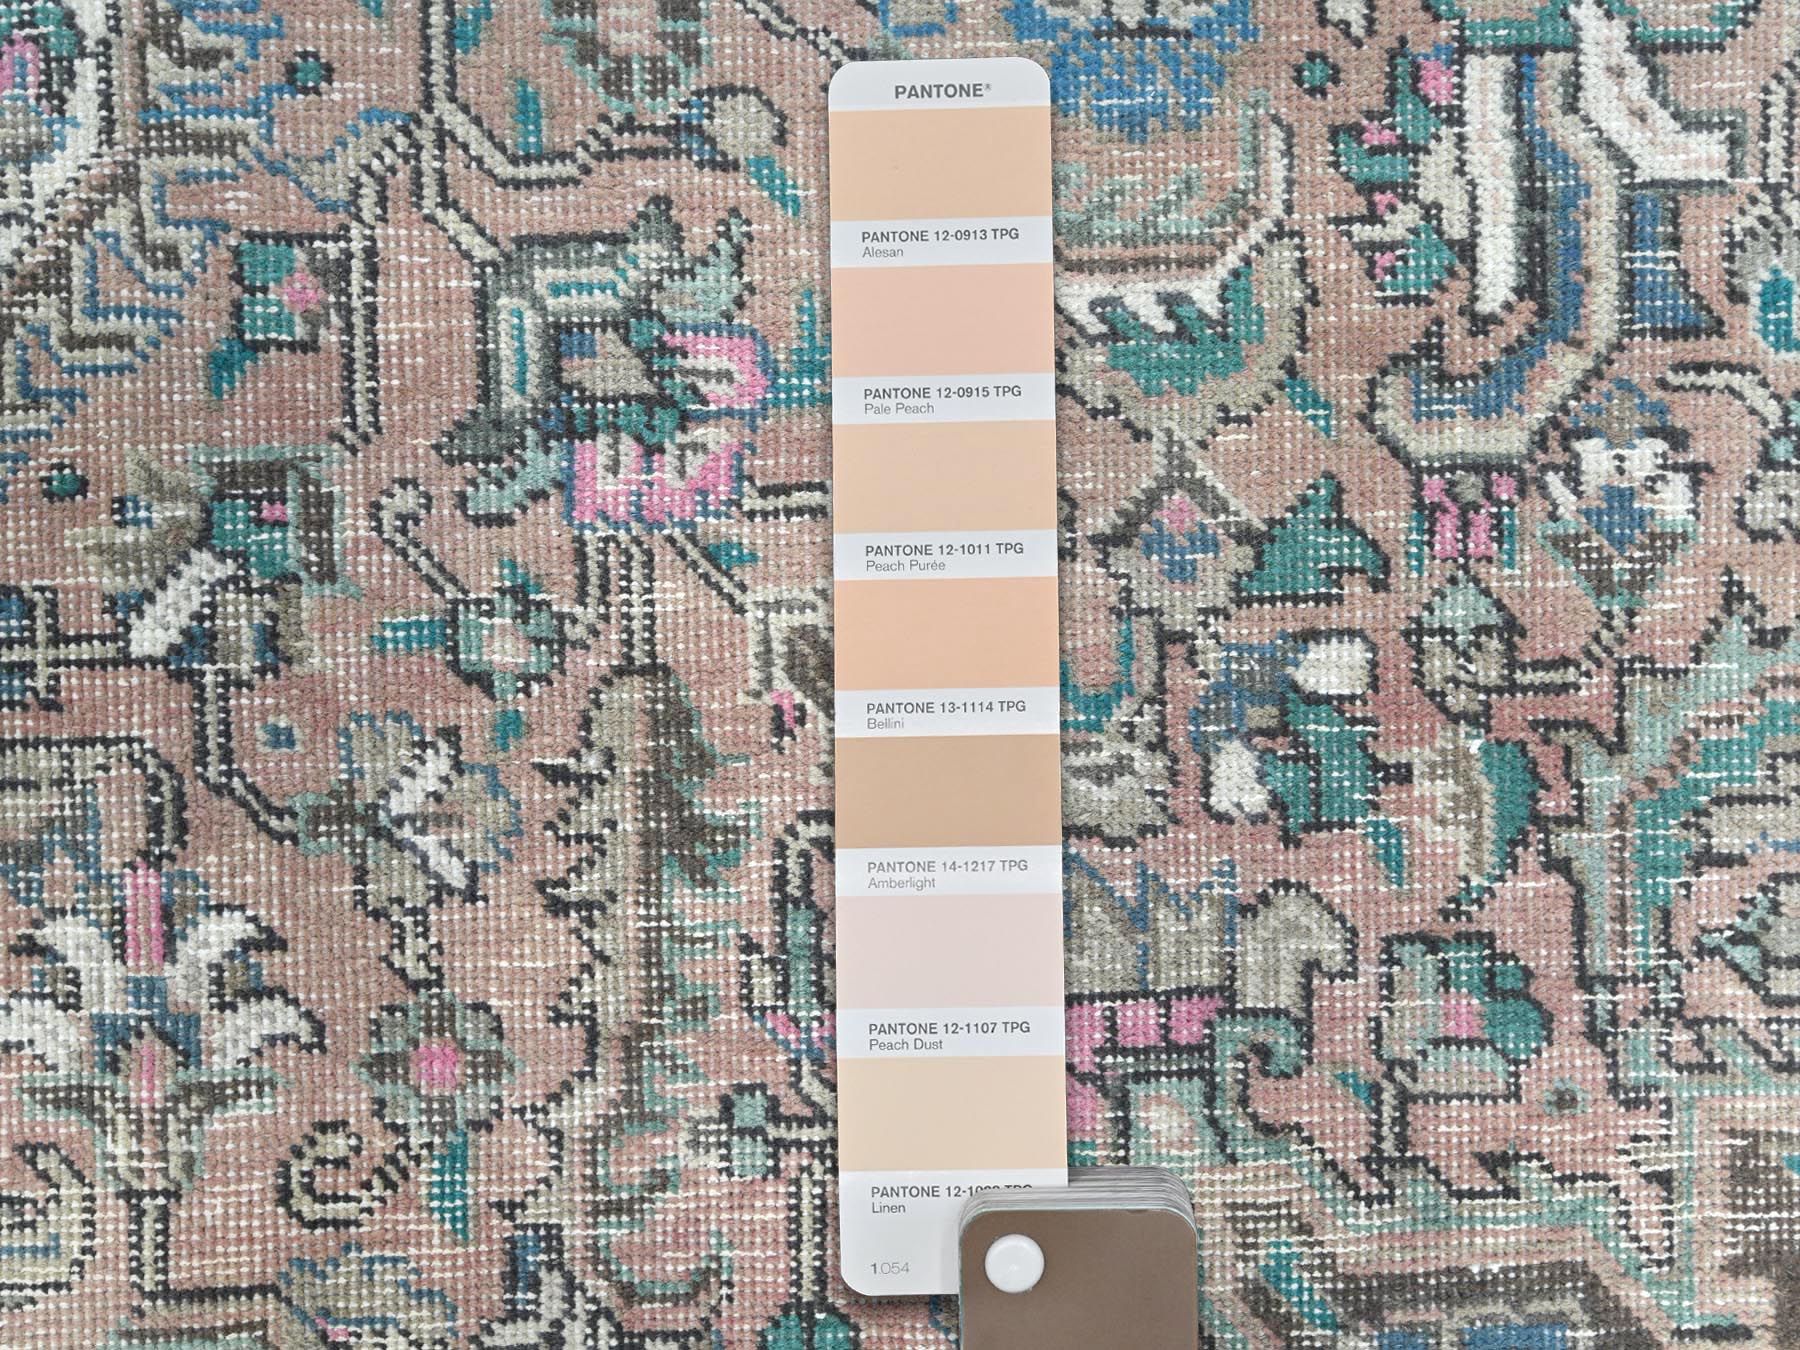 Overdyed & Vintage Rugs LUV730062